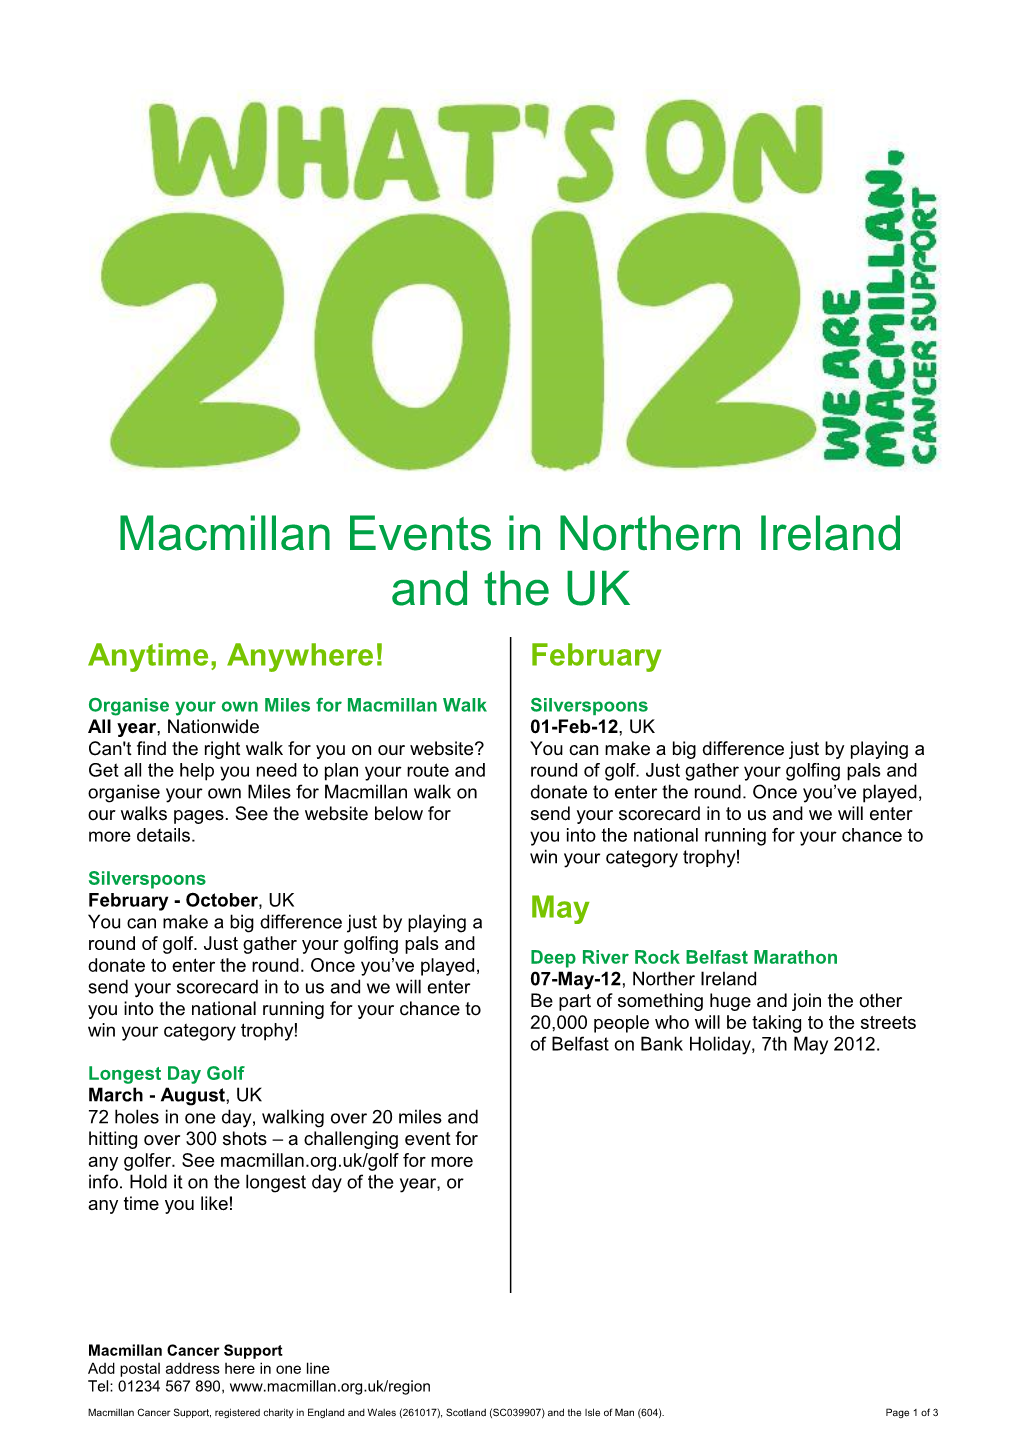 Events in Northern Ireland and the UK